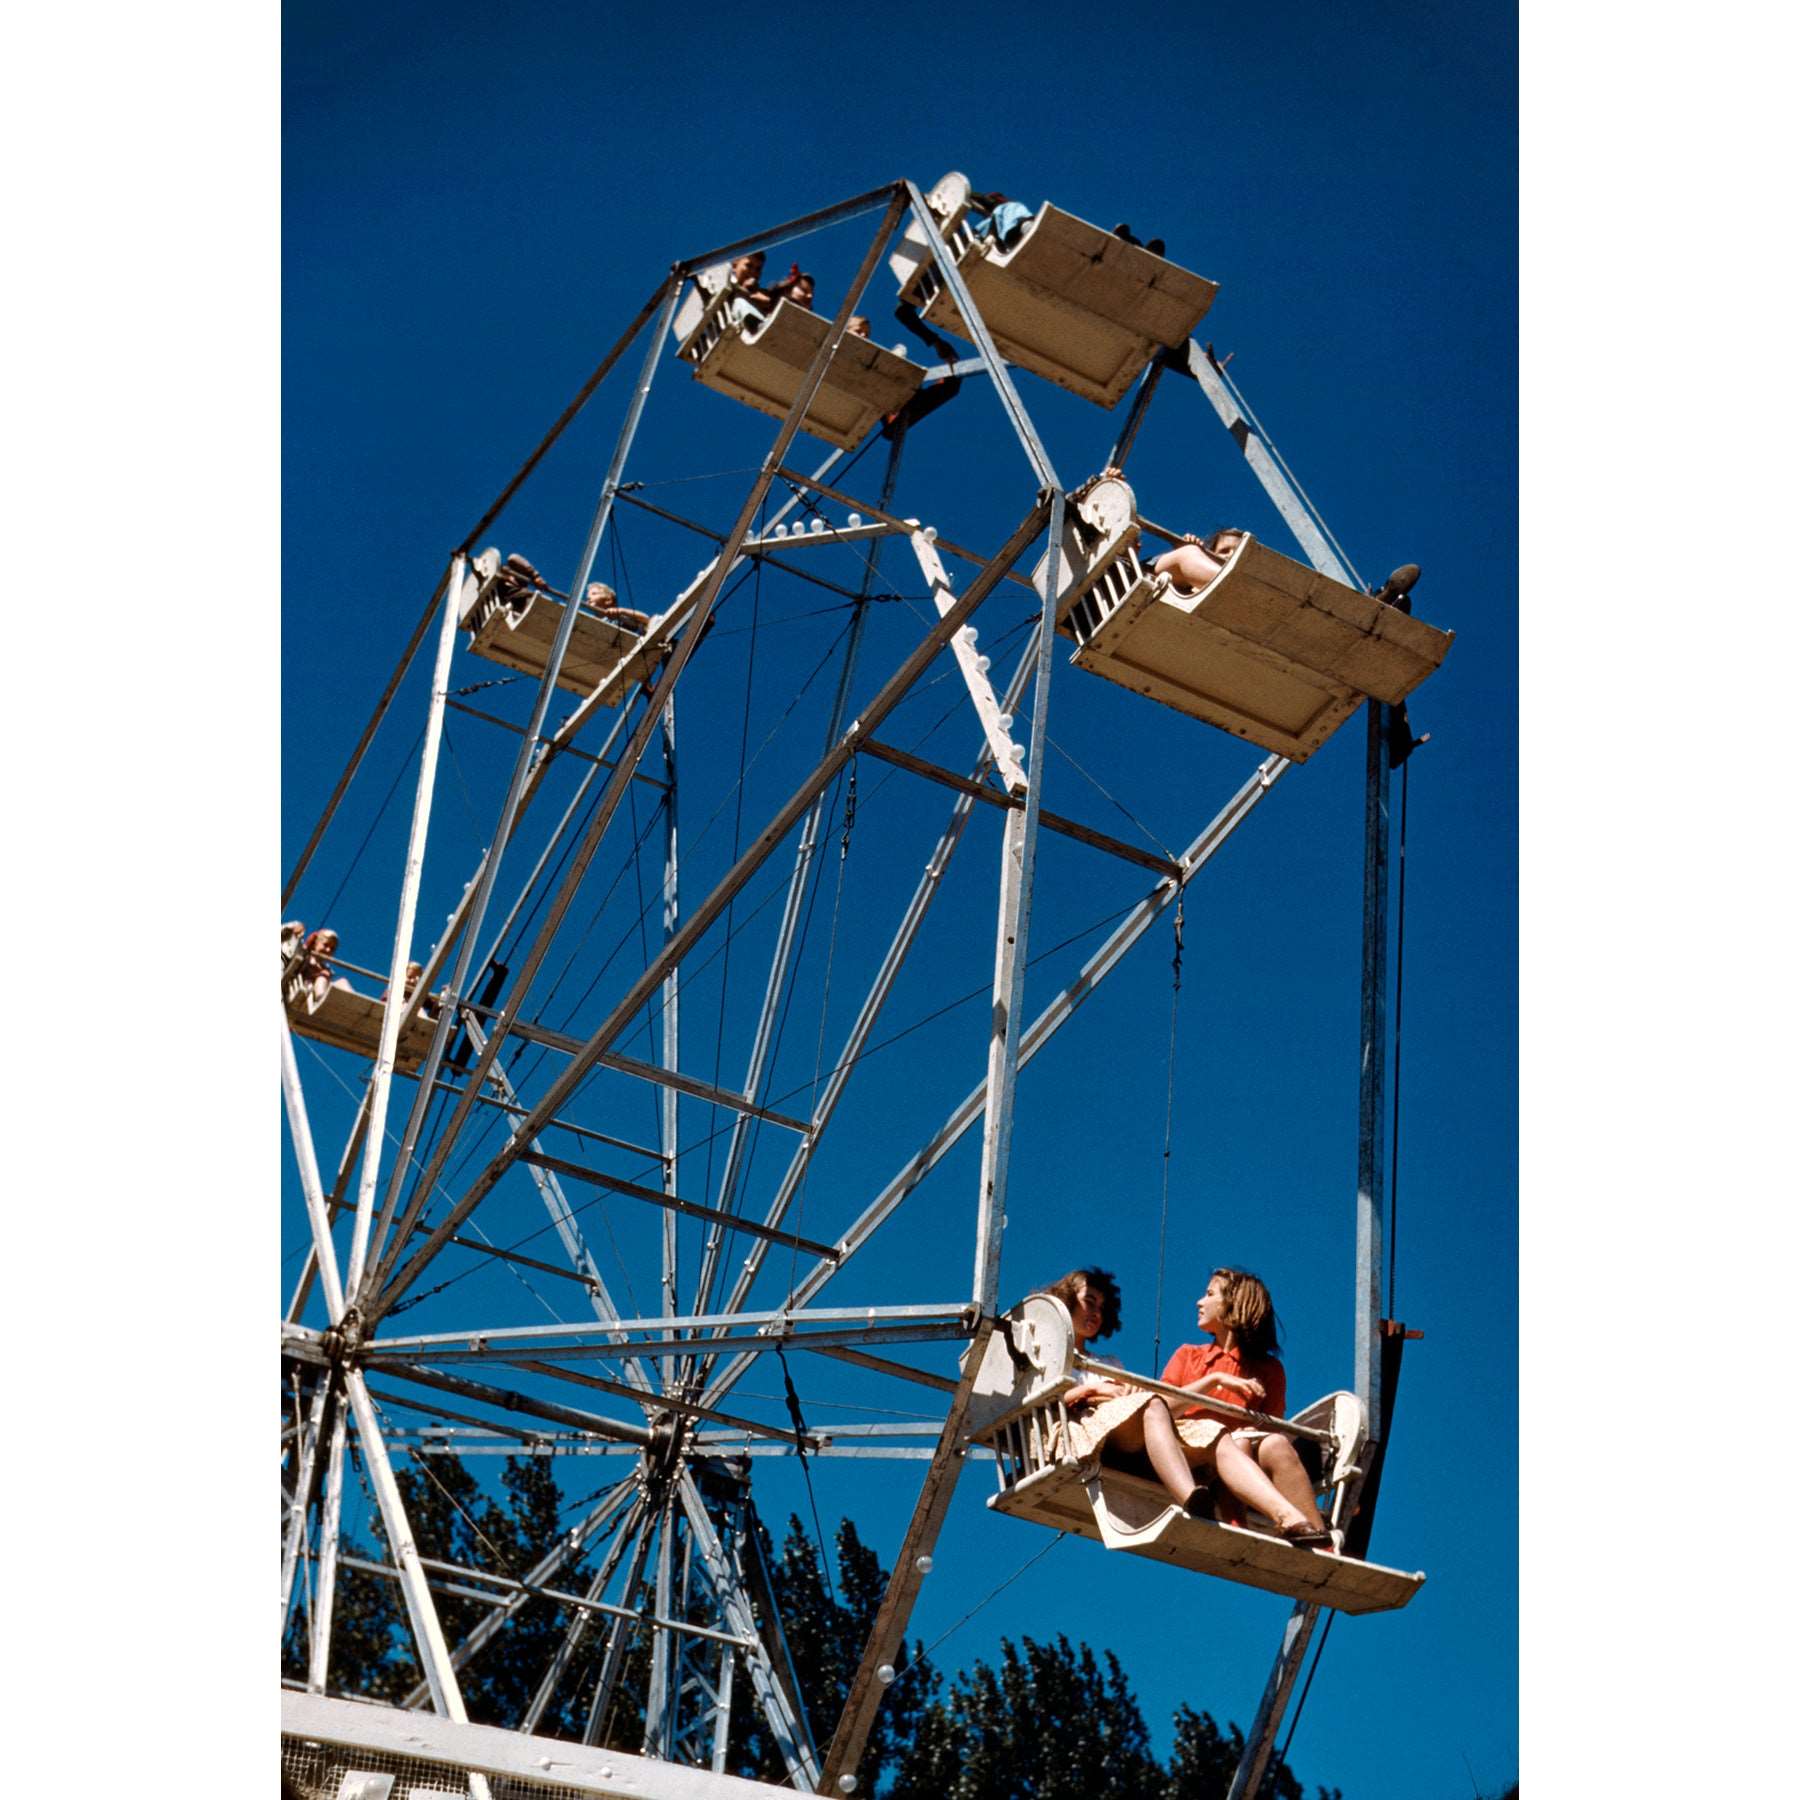 A full color vintage photograph of the Ferris Wheel at the Vermont State Fair